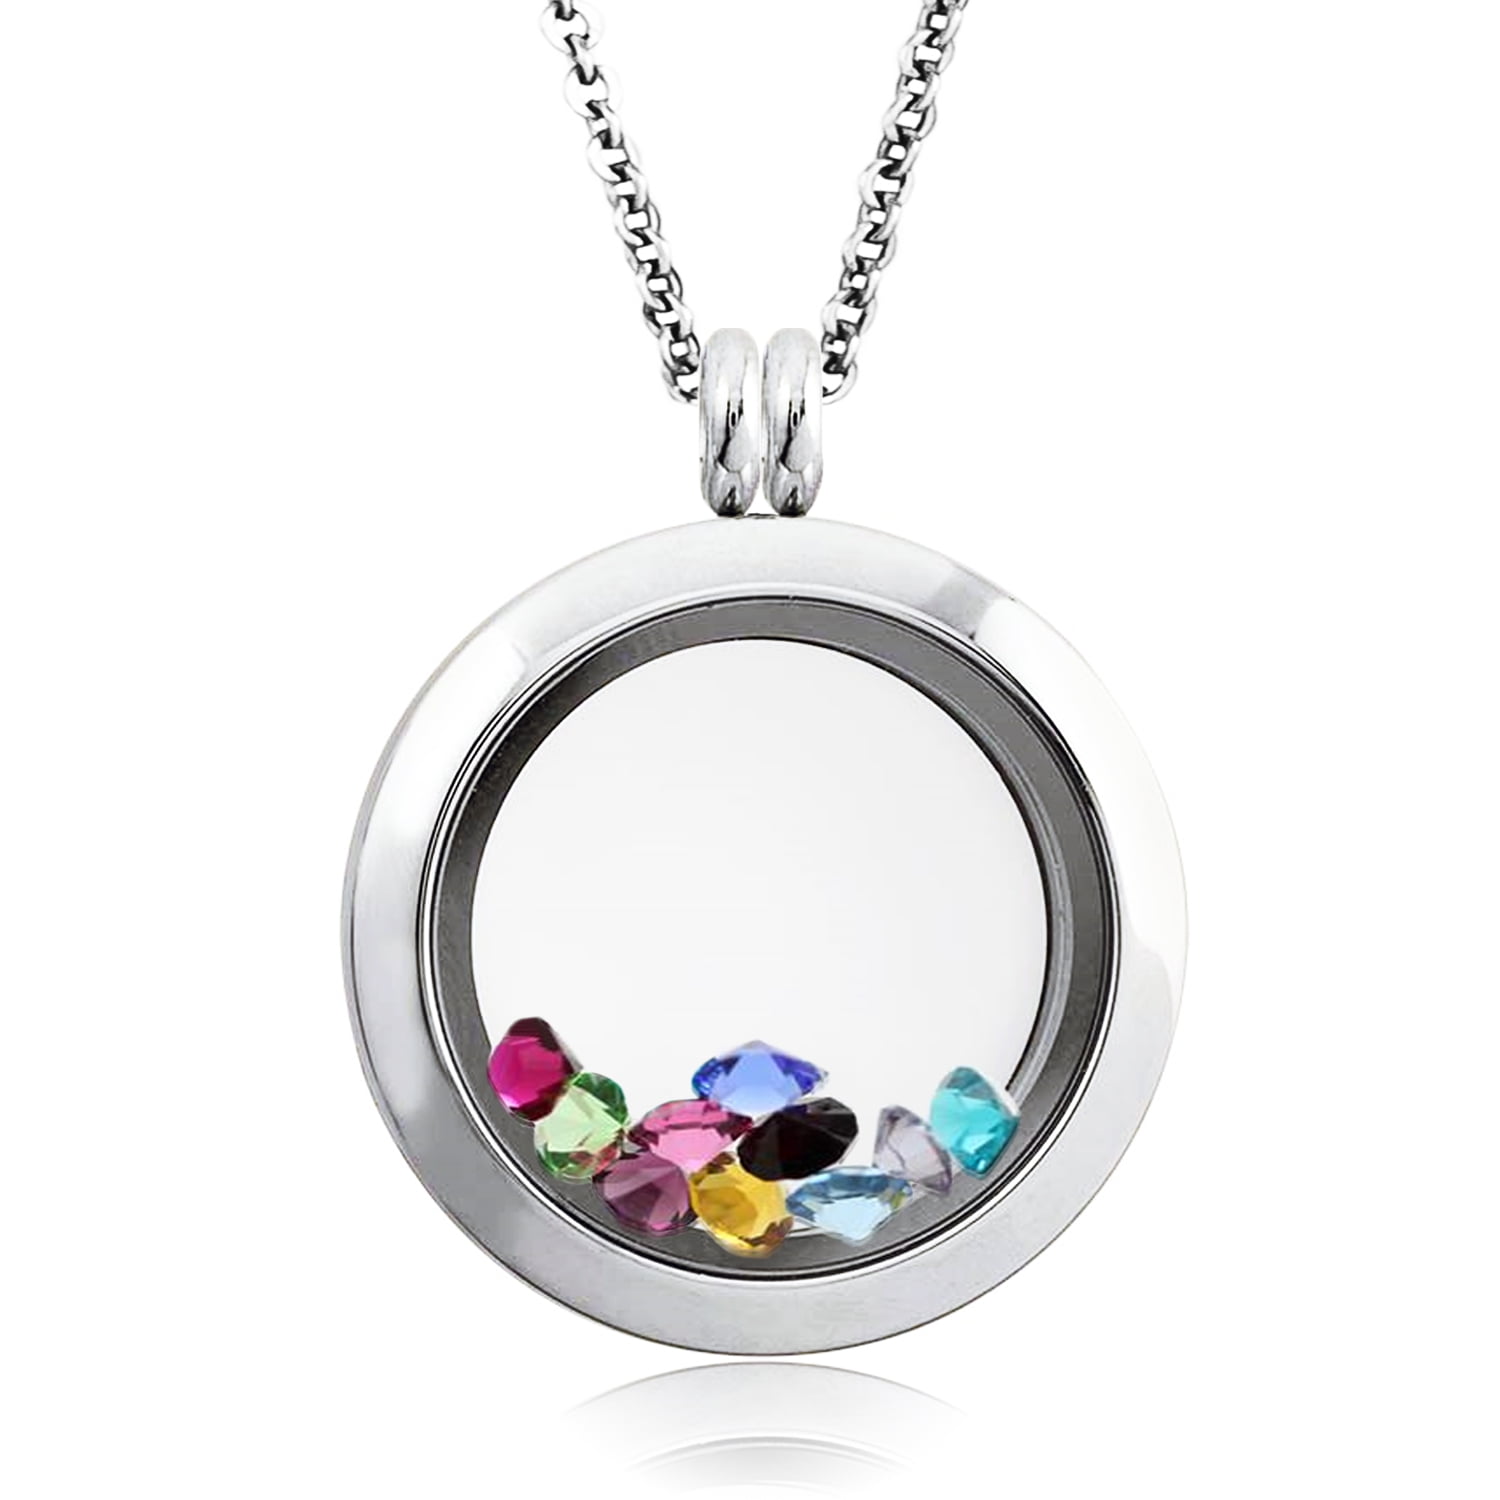 Living Memory Floating Charms Glass Round Locket Pendant Necklace Jewelry Gift